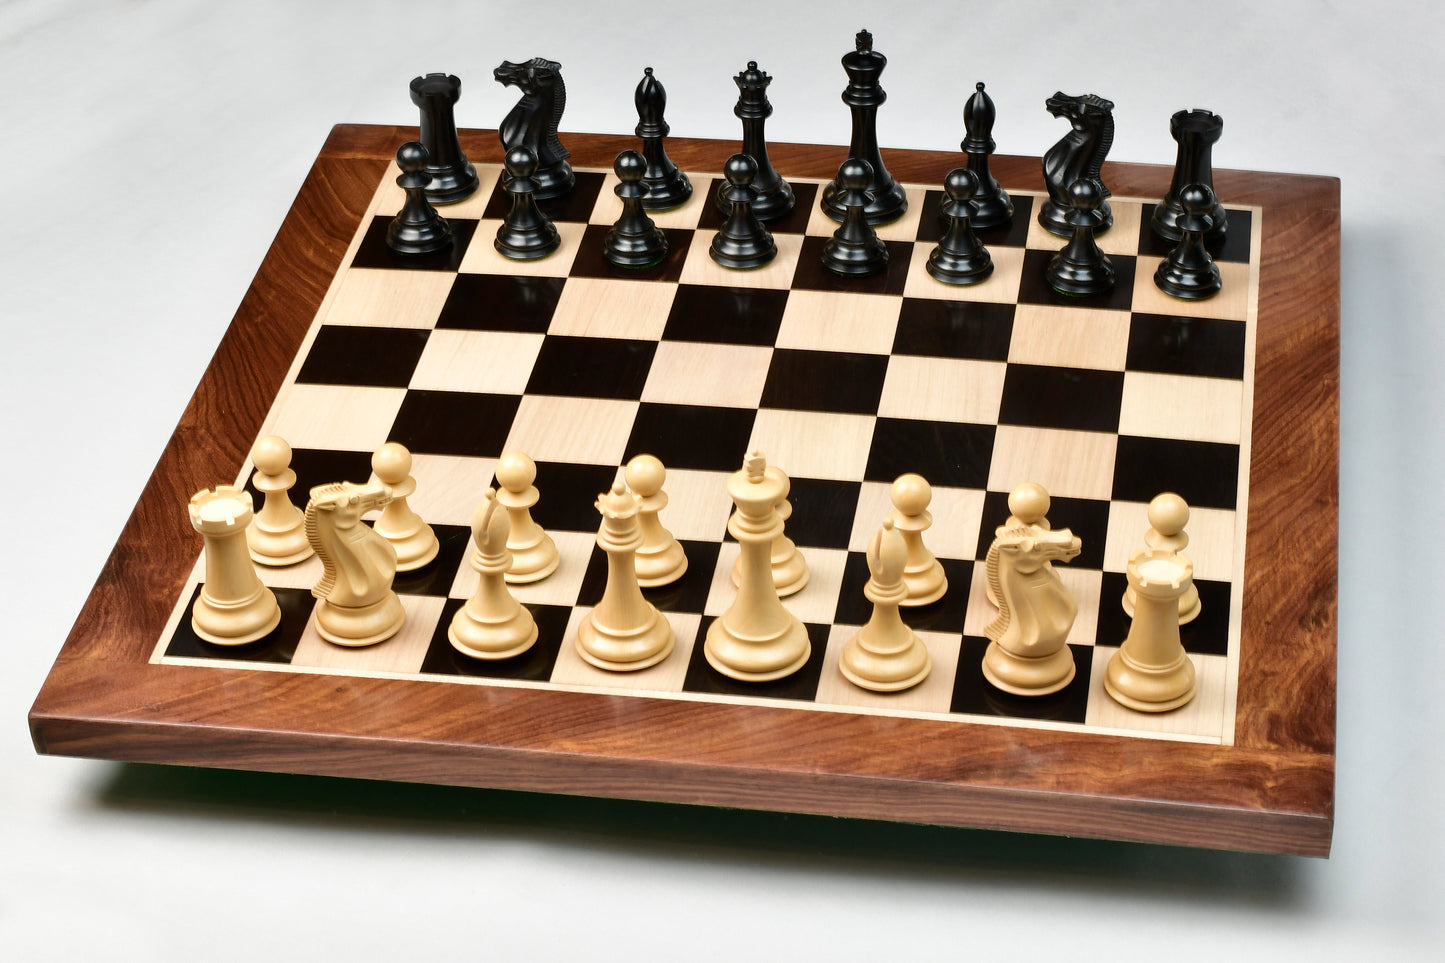 The Dominator Weighted Staunton Chess Pieces in Ebony / Box Wood - 4.0" King